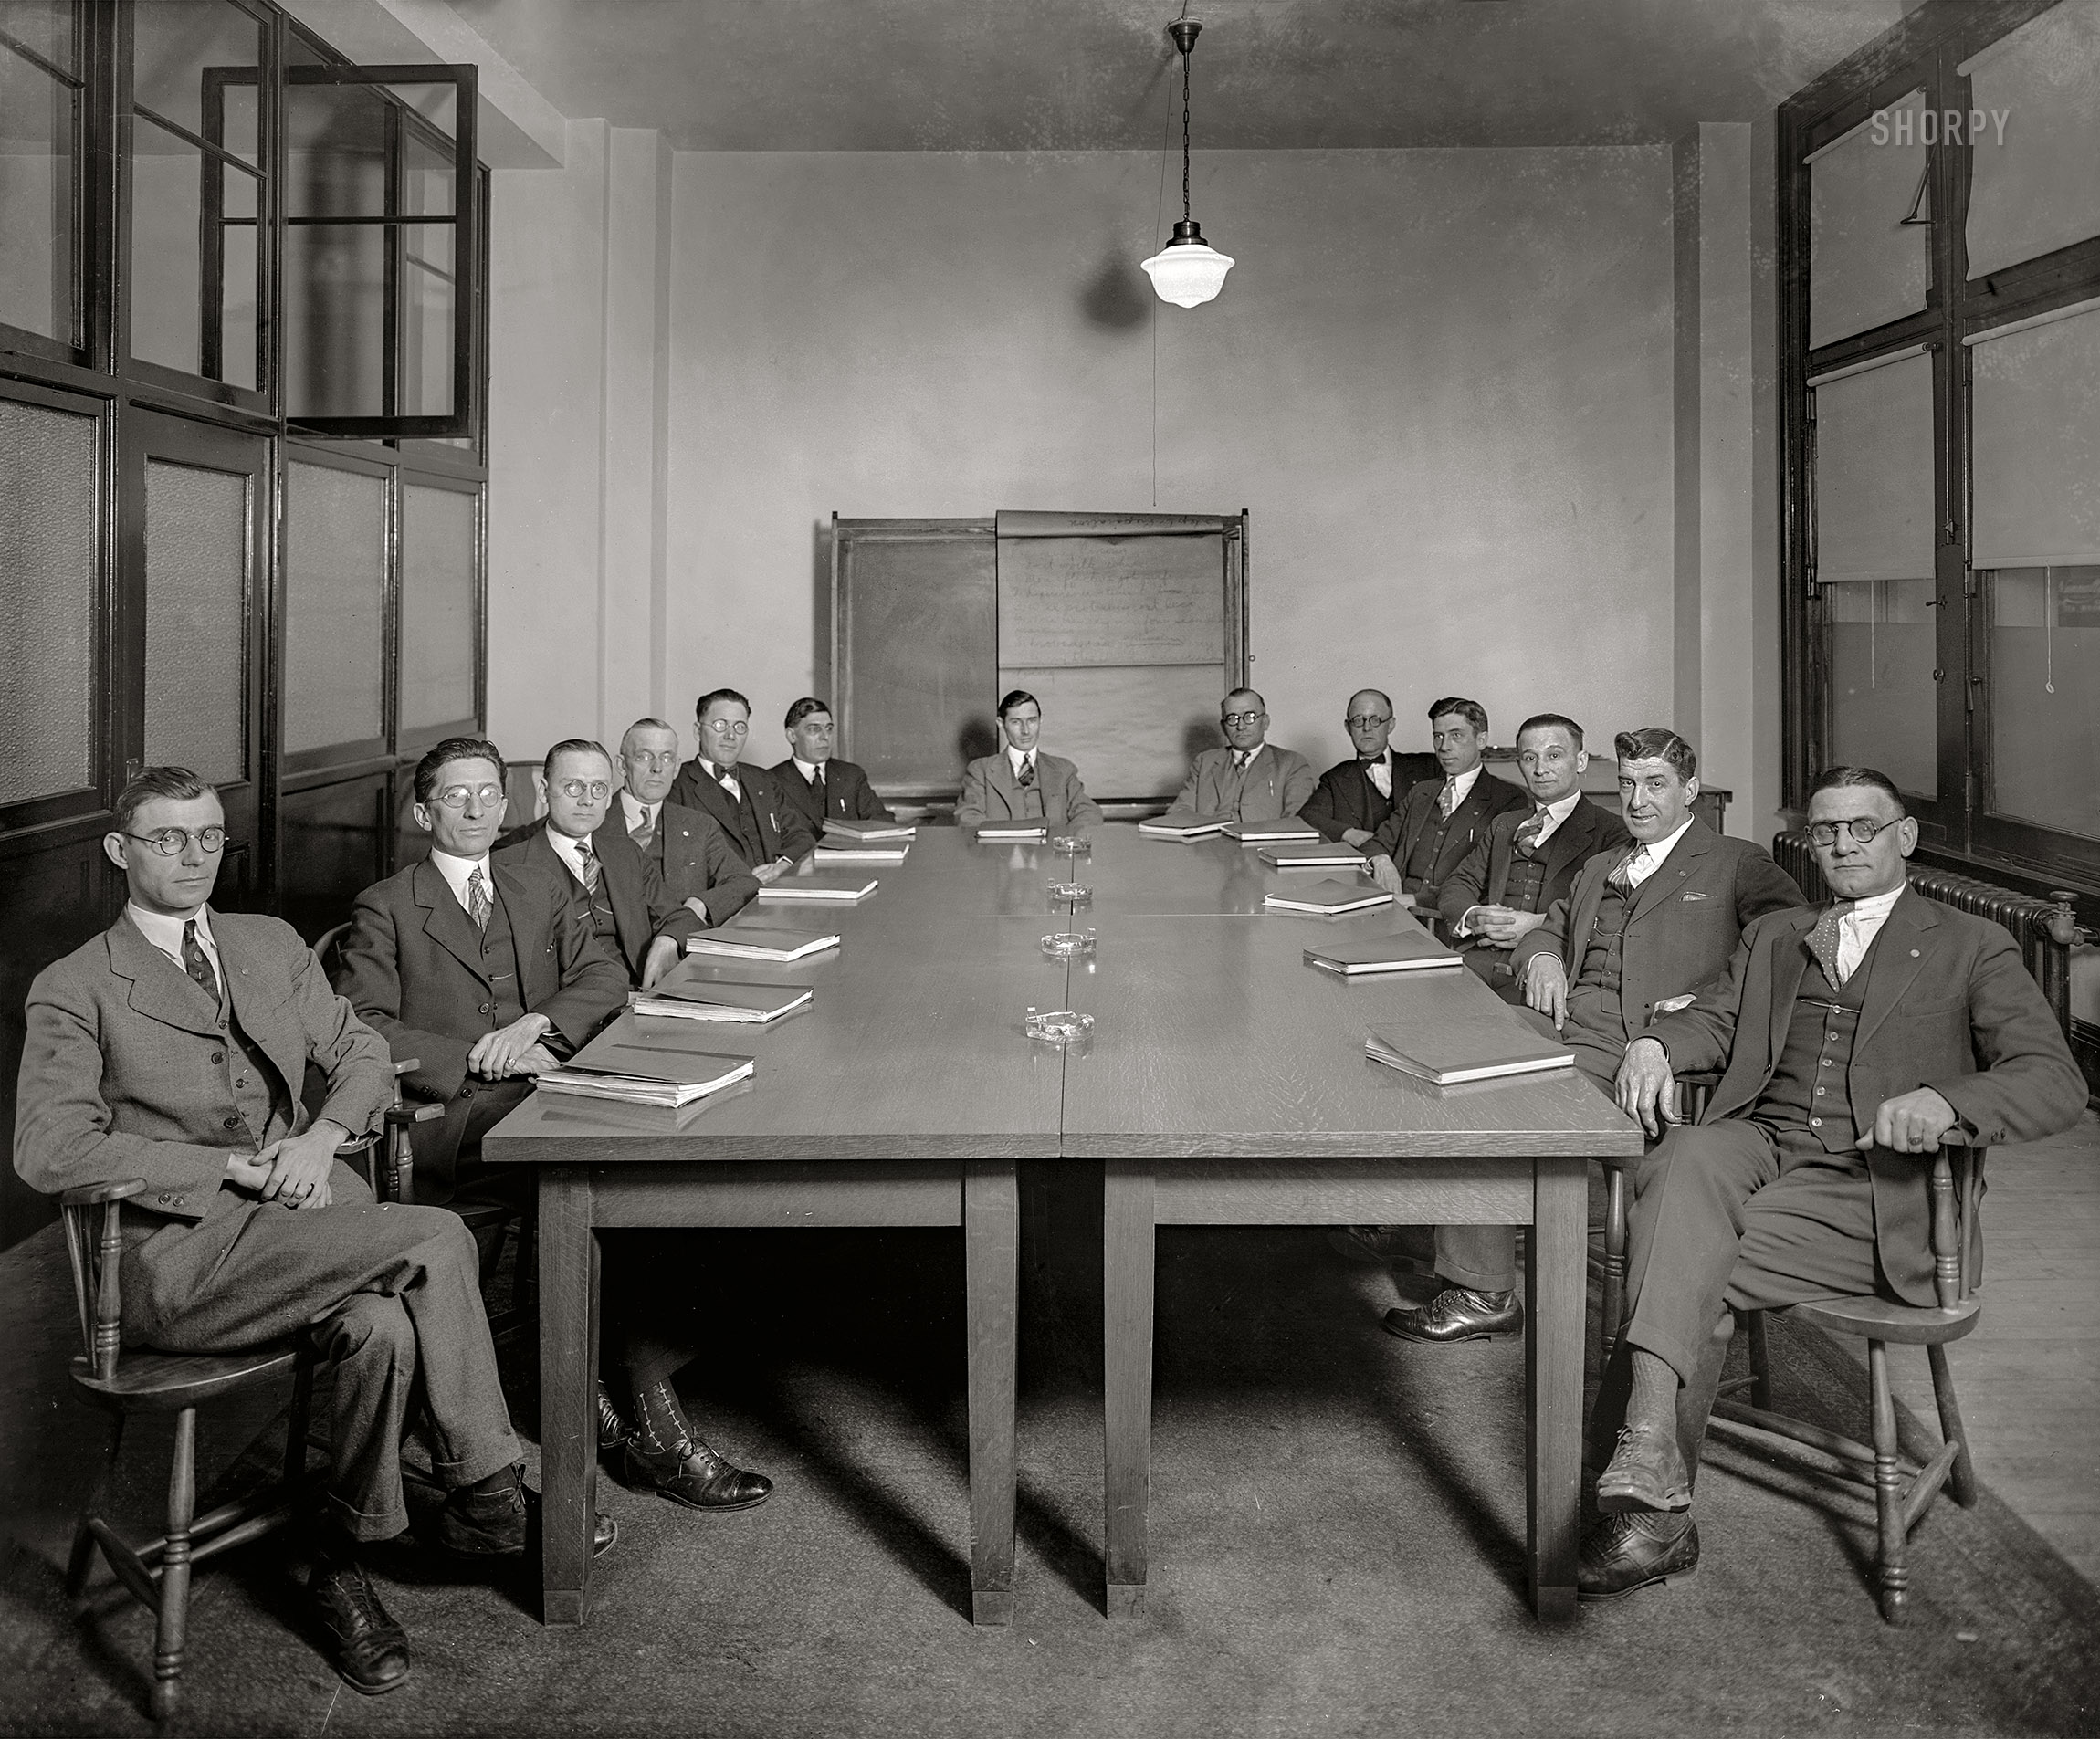 Washington, D.C., circa 1928. "C&P Tel. Co." Officers of the Chesapeake & Potomac Telephone Company. Do we have a quorum? National Photo Company glass negative. View full size.